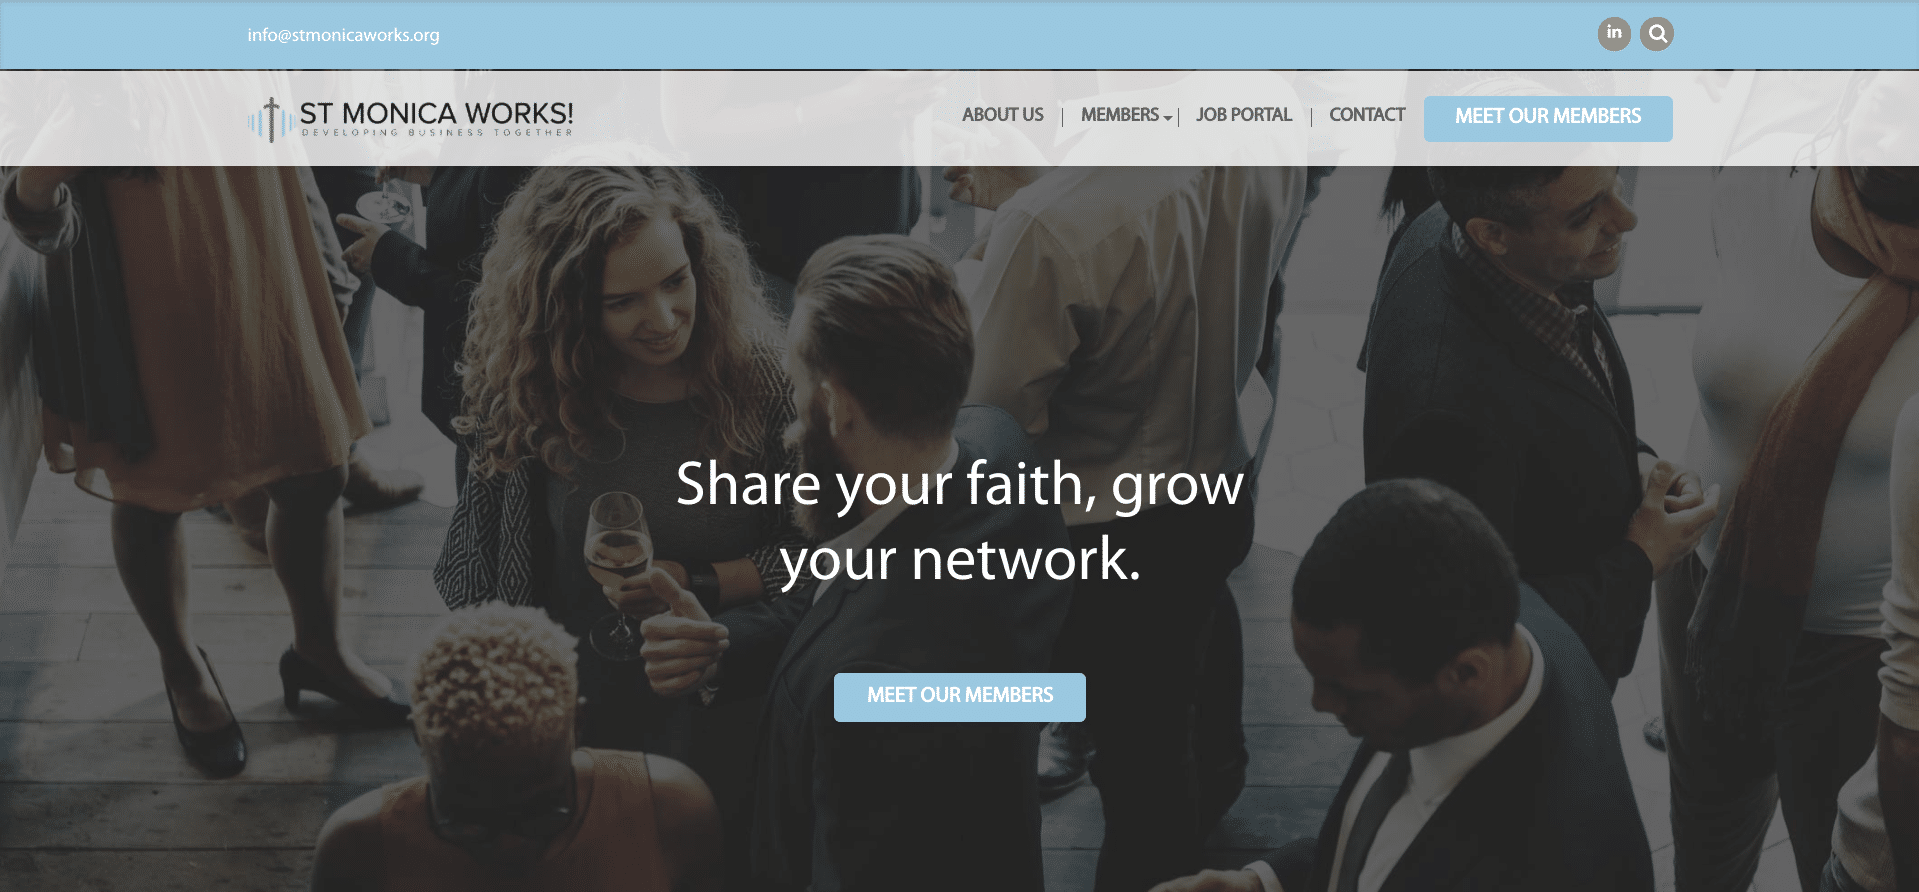 How St. Monica Works Can Grow 200 New Members Each Month with their New Website